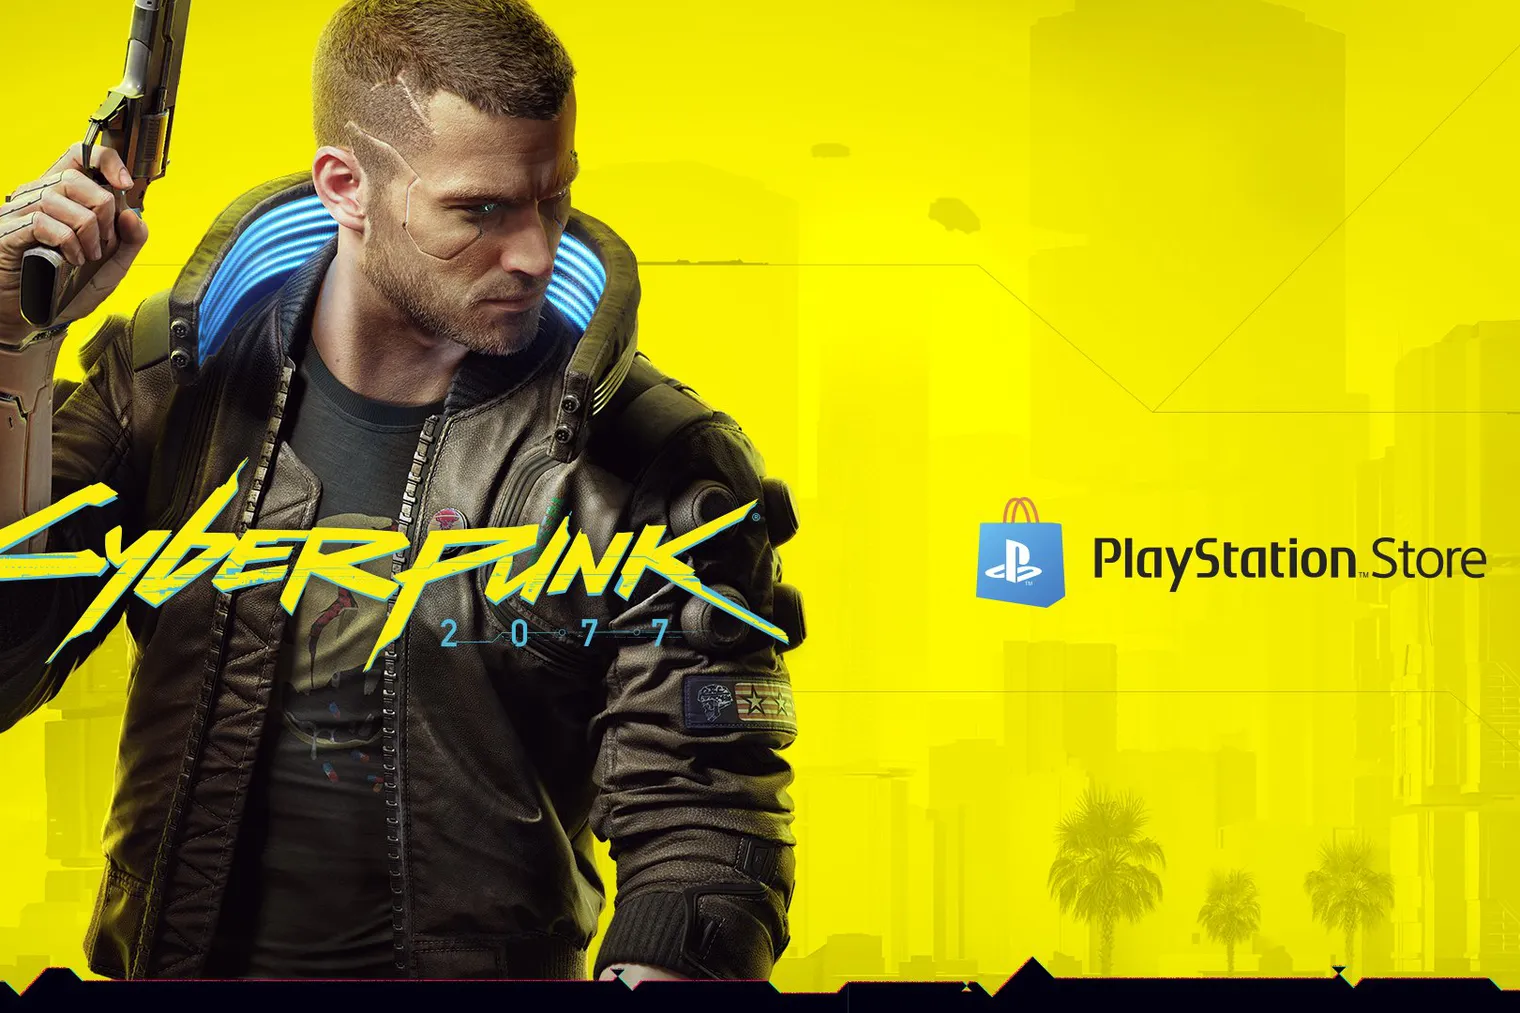 Cyberpunk 2077 returns to the PlayStation Retailer at a reduced mark with a warning for the inappropriate PS4 console